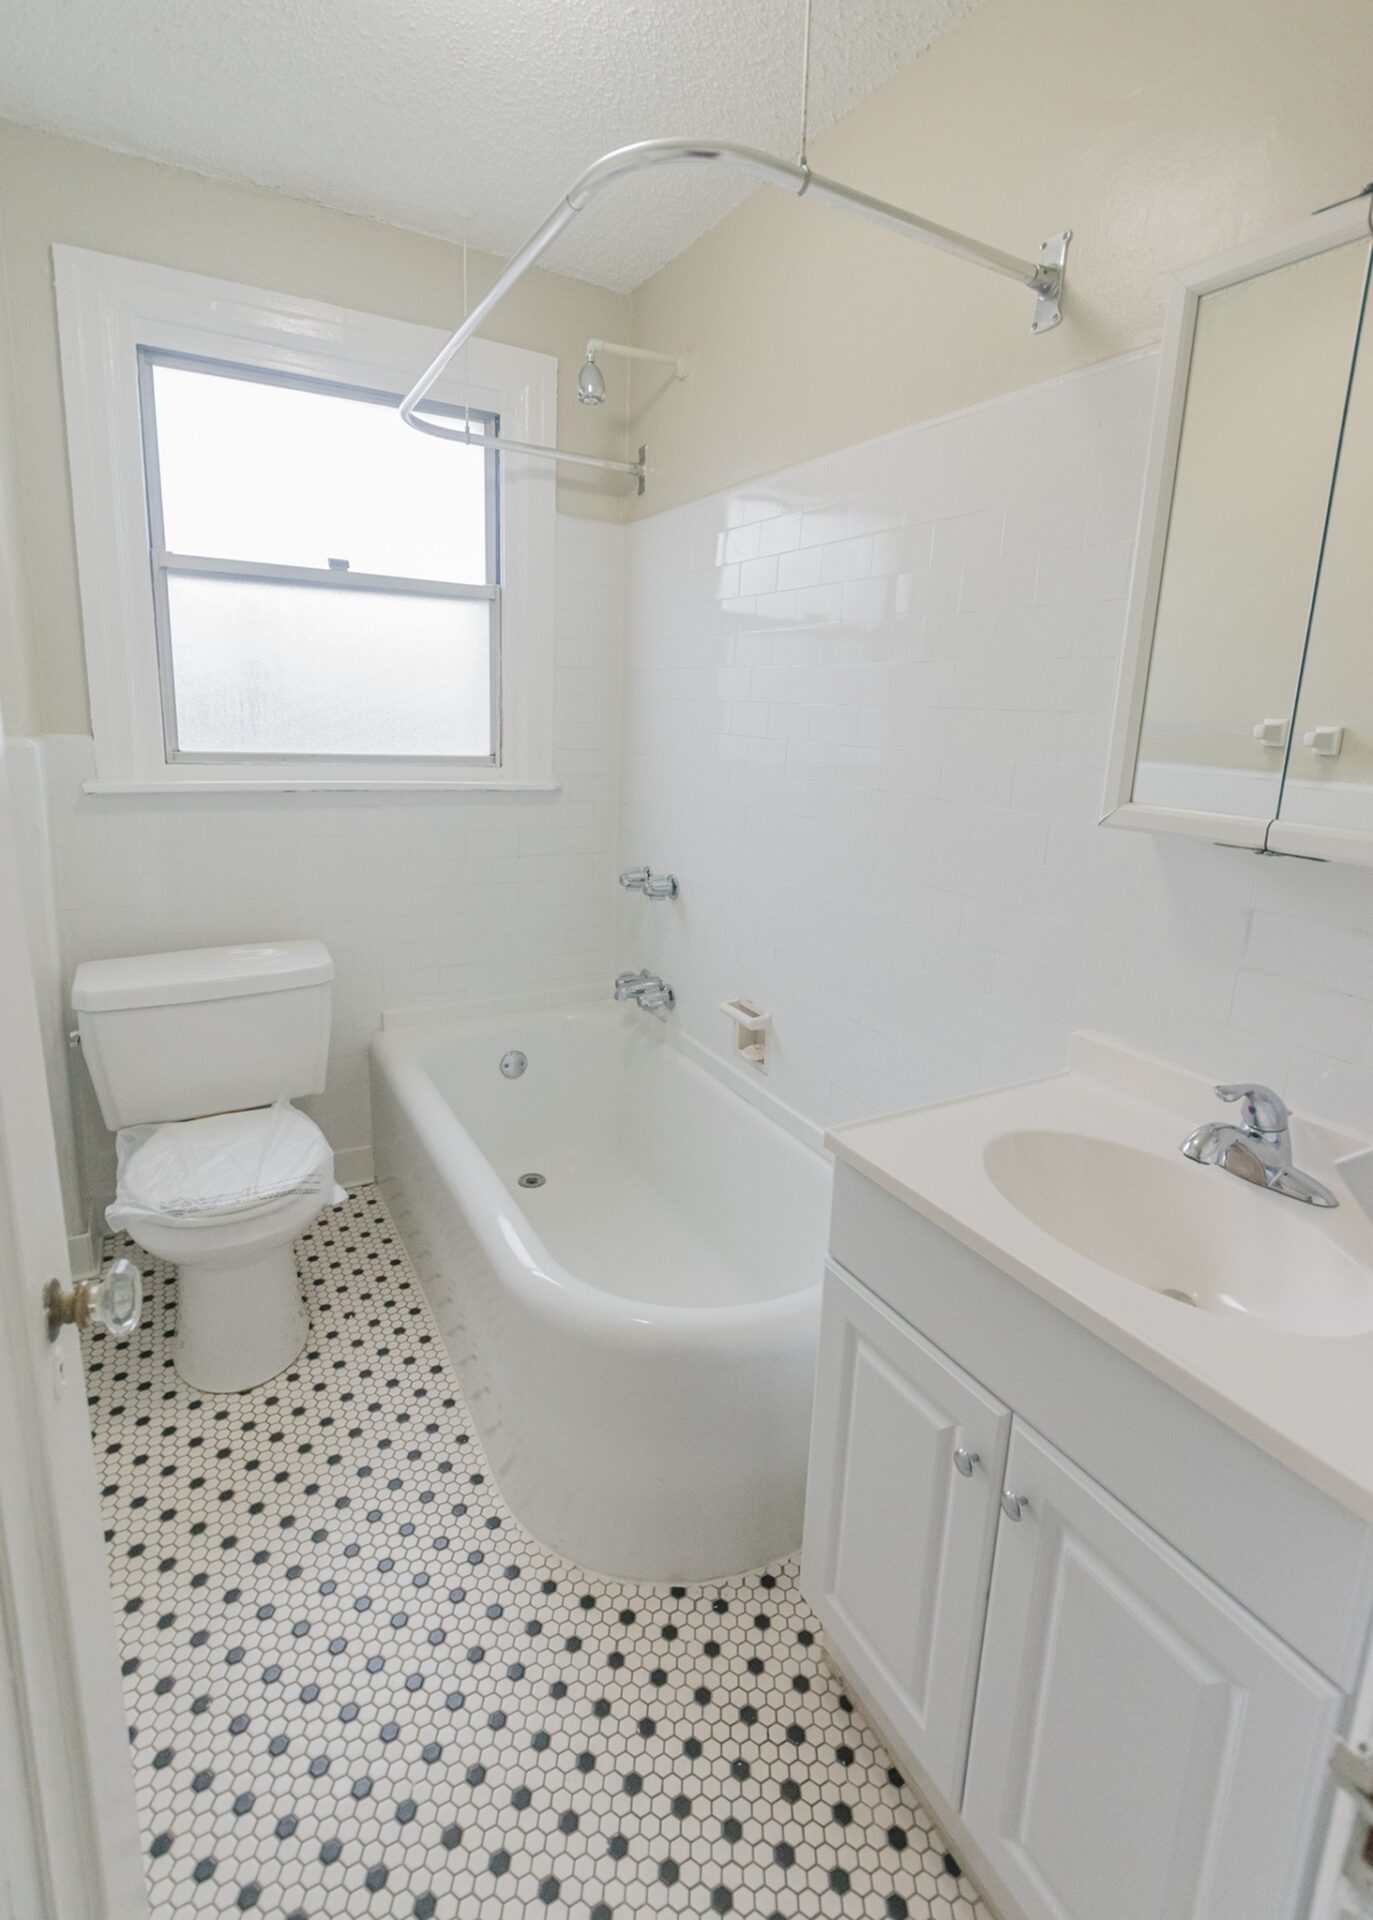 Suburban Court tiled bathroom with large tub and shower.